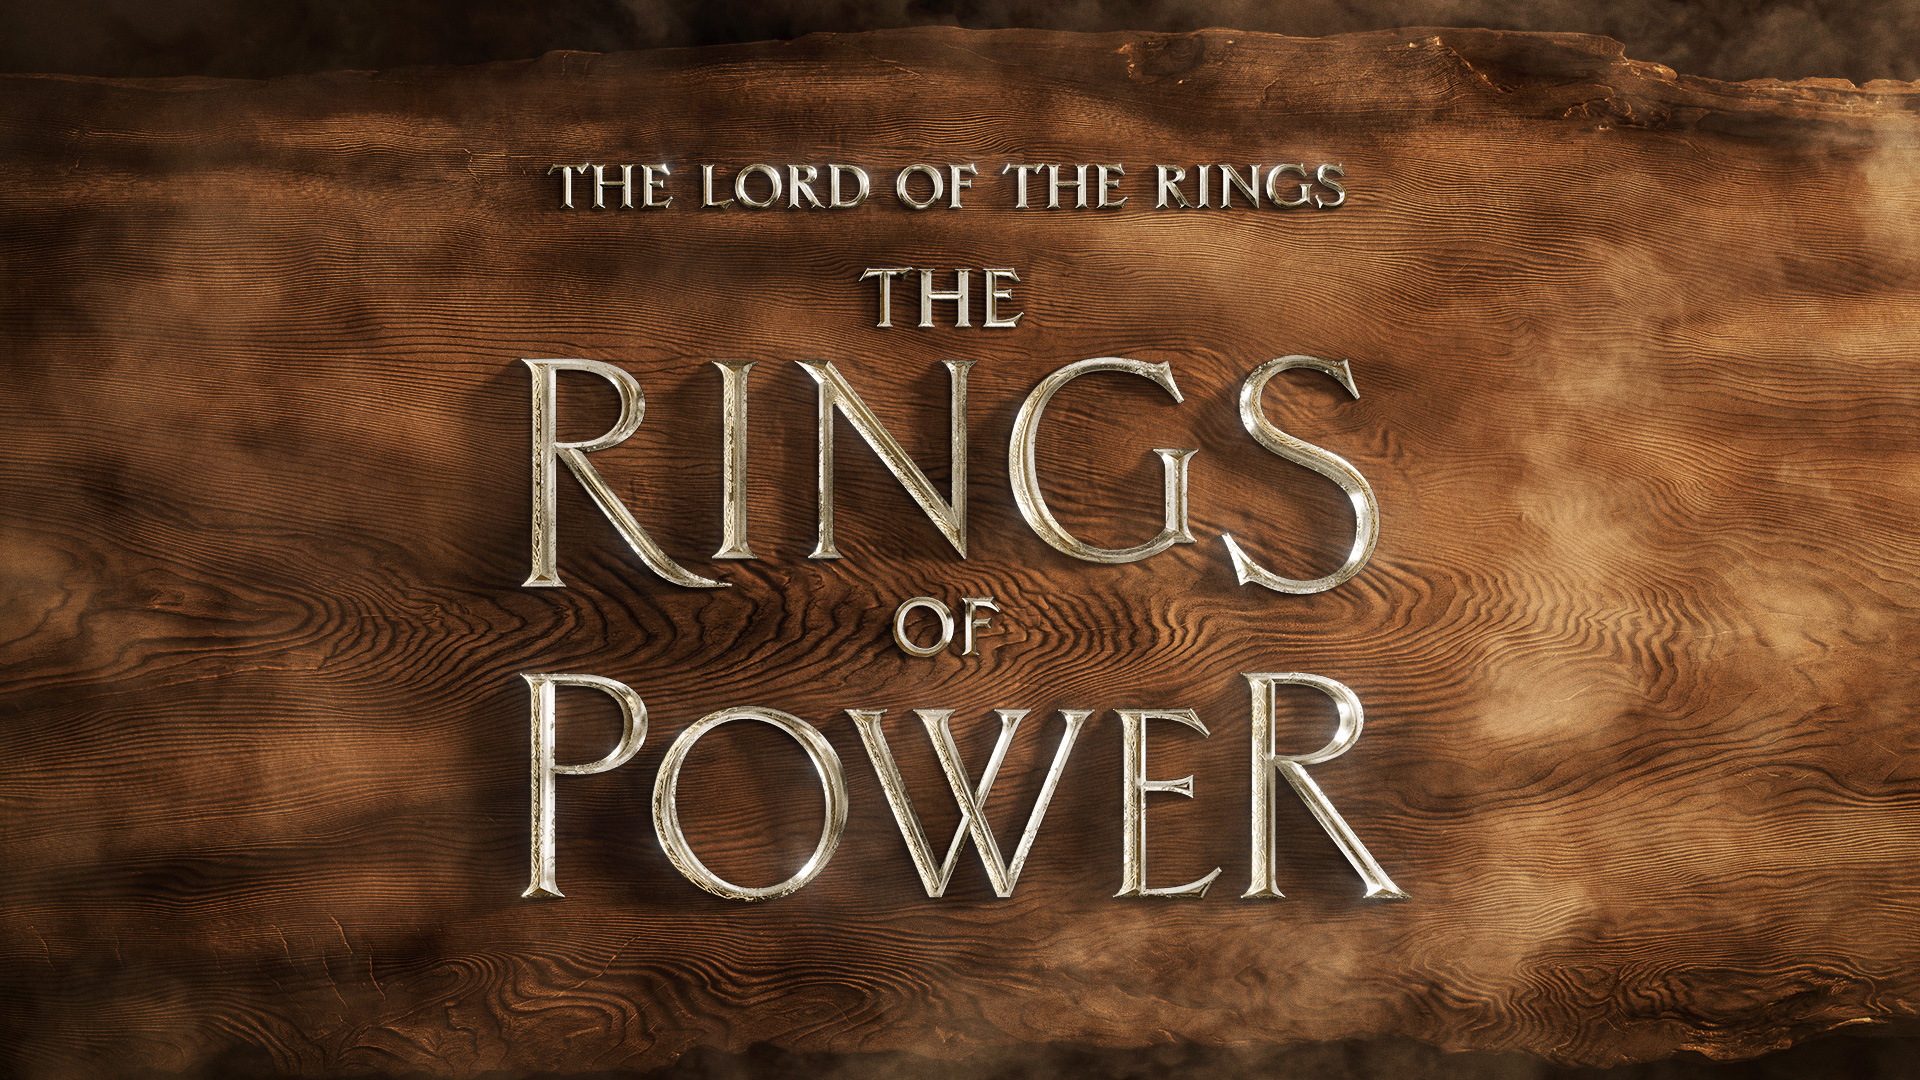 LOTR: The Rings of Power Trailer Subtly Sets Up Sauron's Arrival